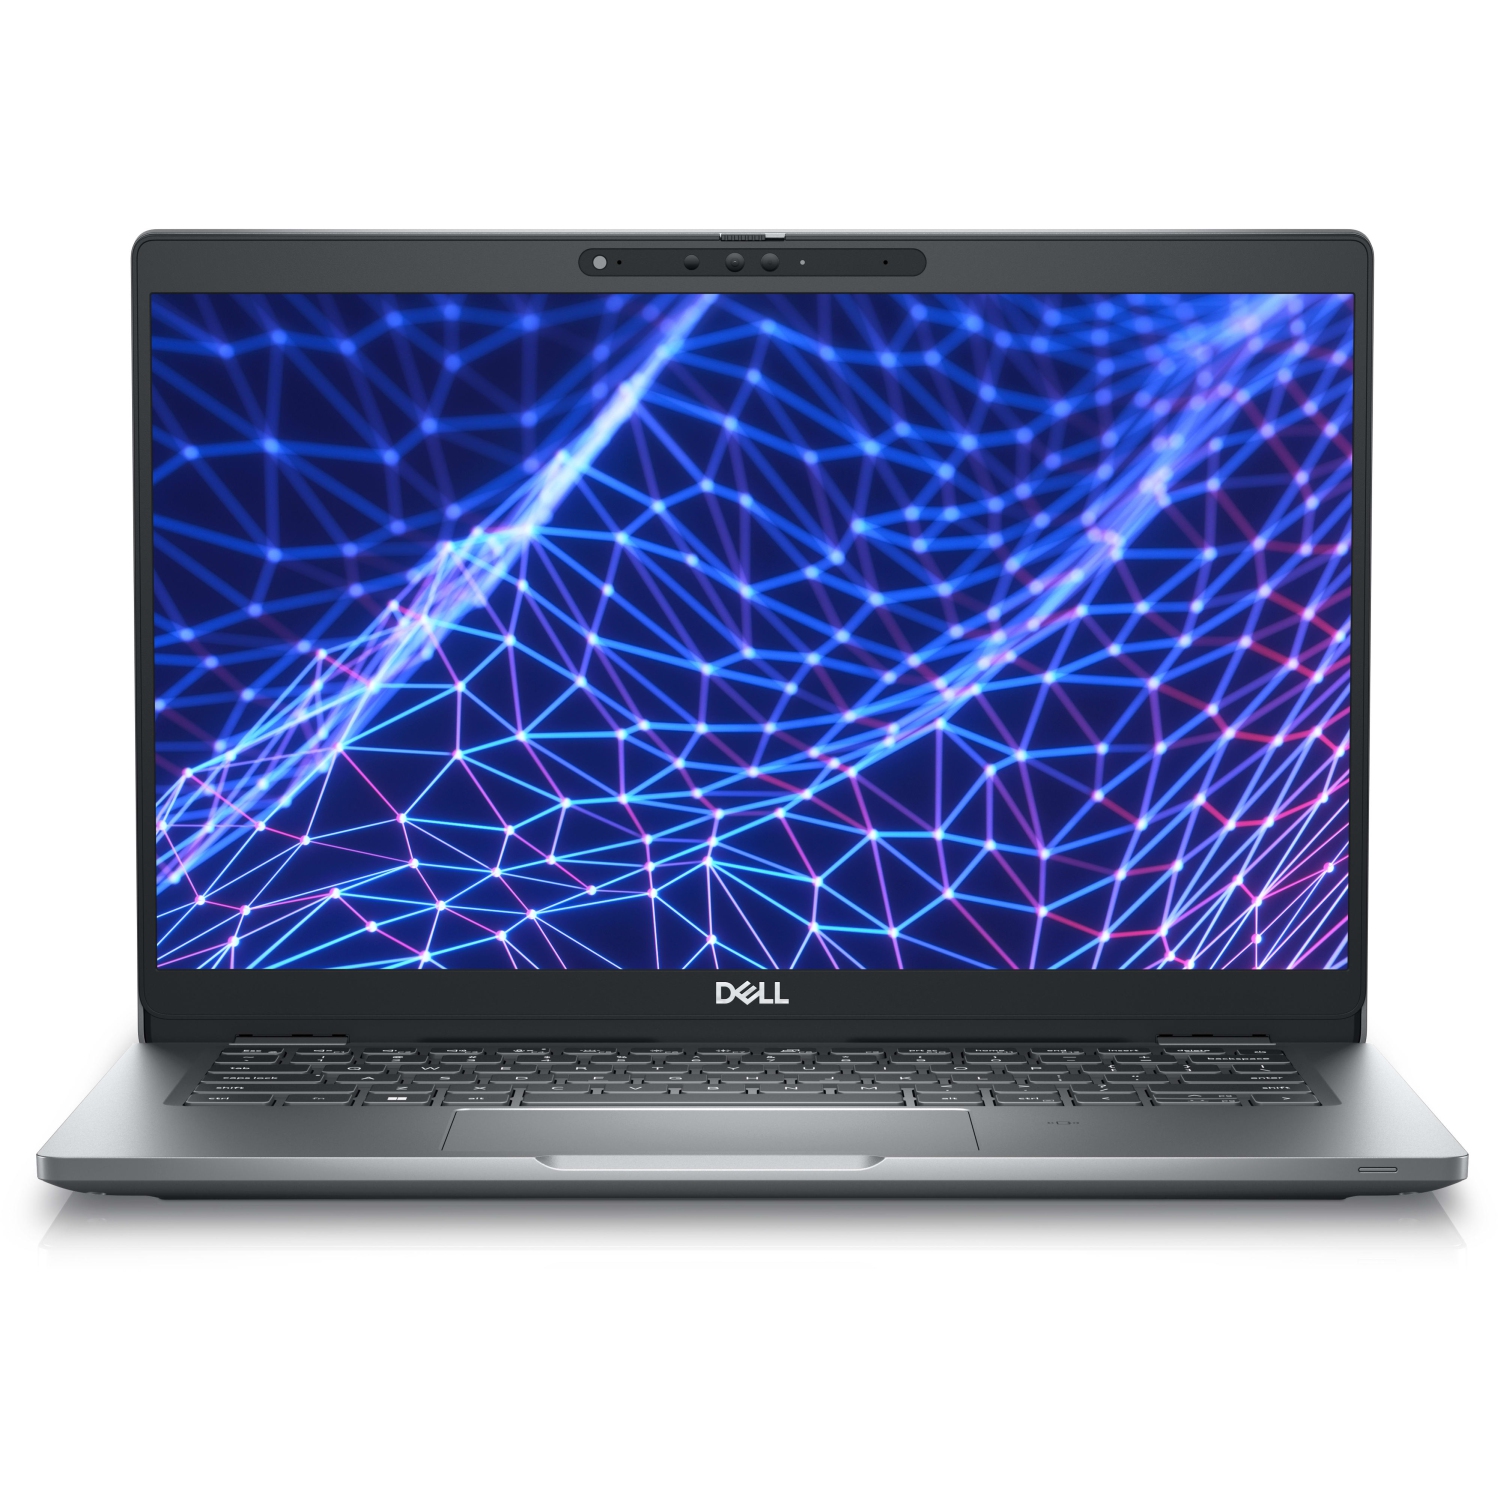 Dell Latitude 5000 5330 Laptop (2022) | 13.3" FHD | Core i5 - 256GB SSD - 16GB RAM | 10 Cores @ 4.4 GHz - 12th Gen CPU Certified Refurbished